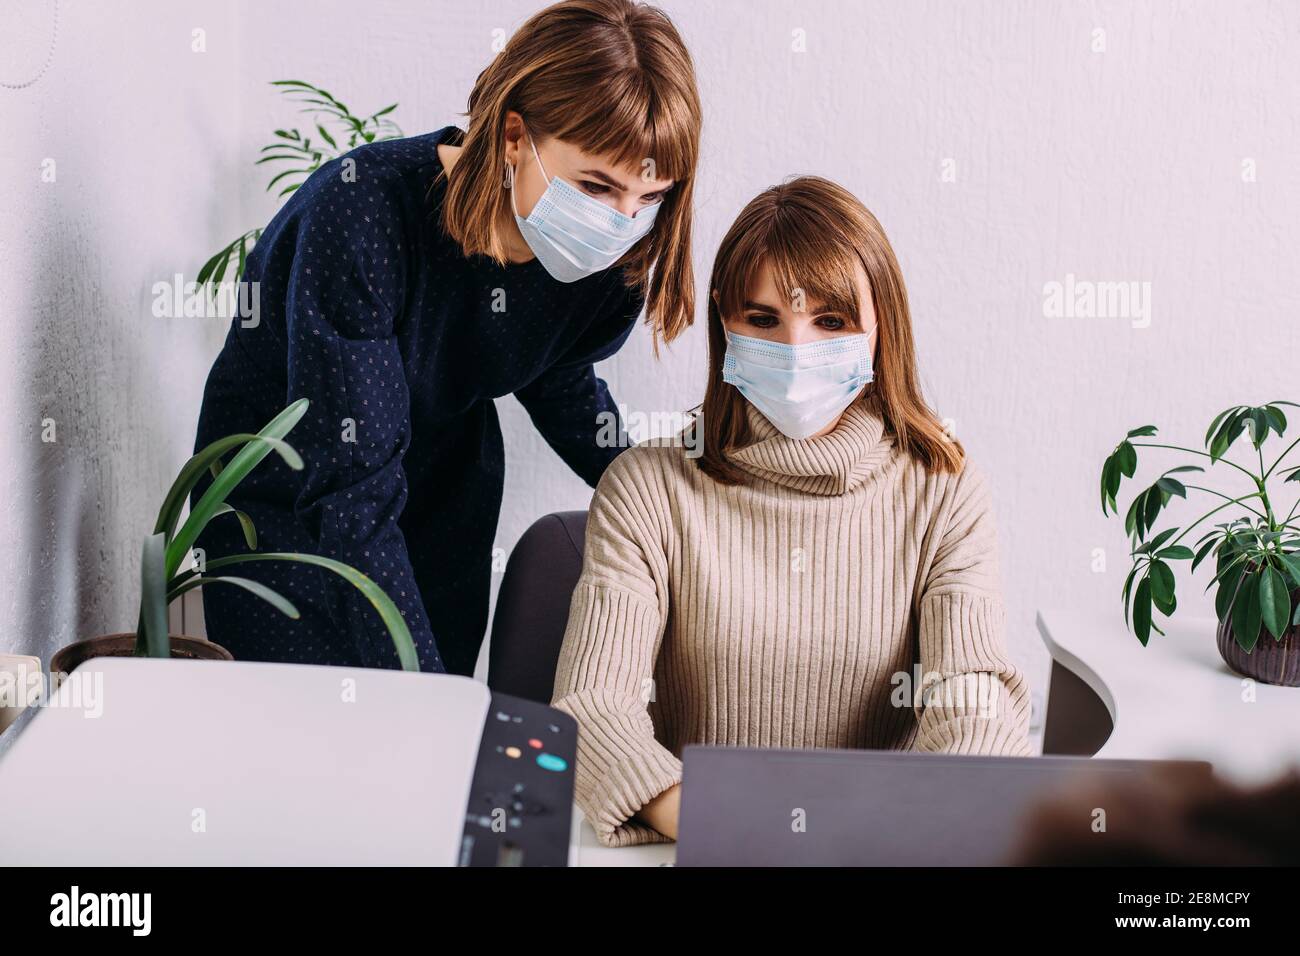 Beautiful twins sisters women with a medical protective face mask working together in a light office surrounded by plants. Stock Photo